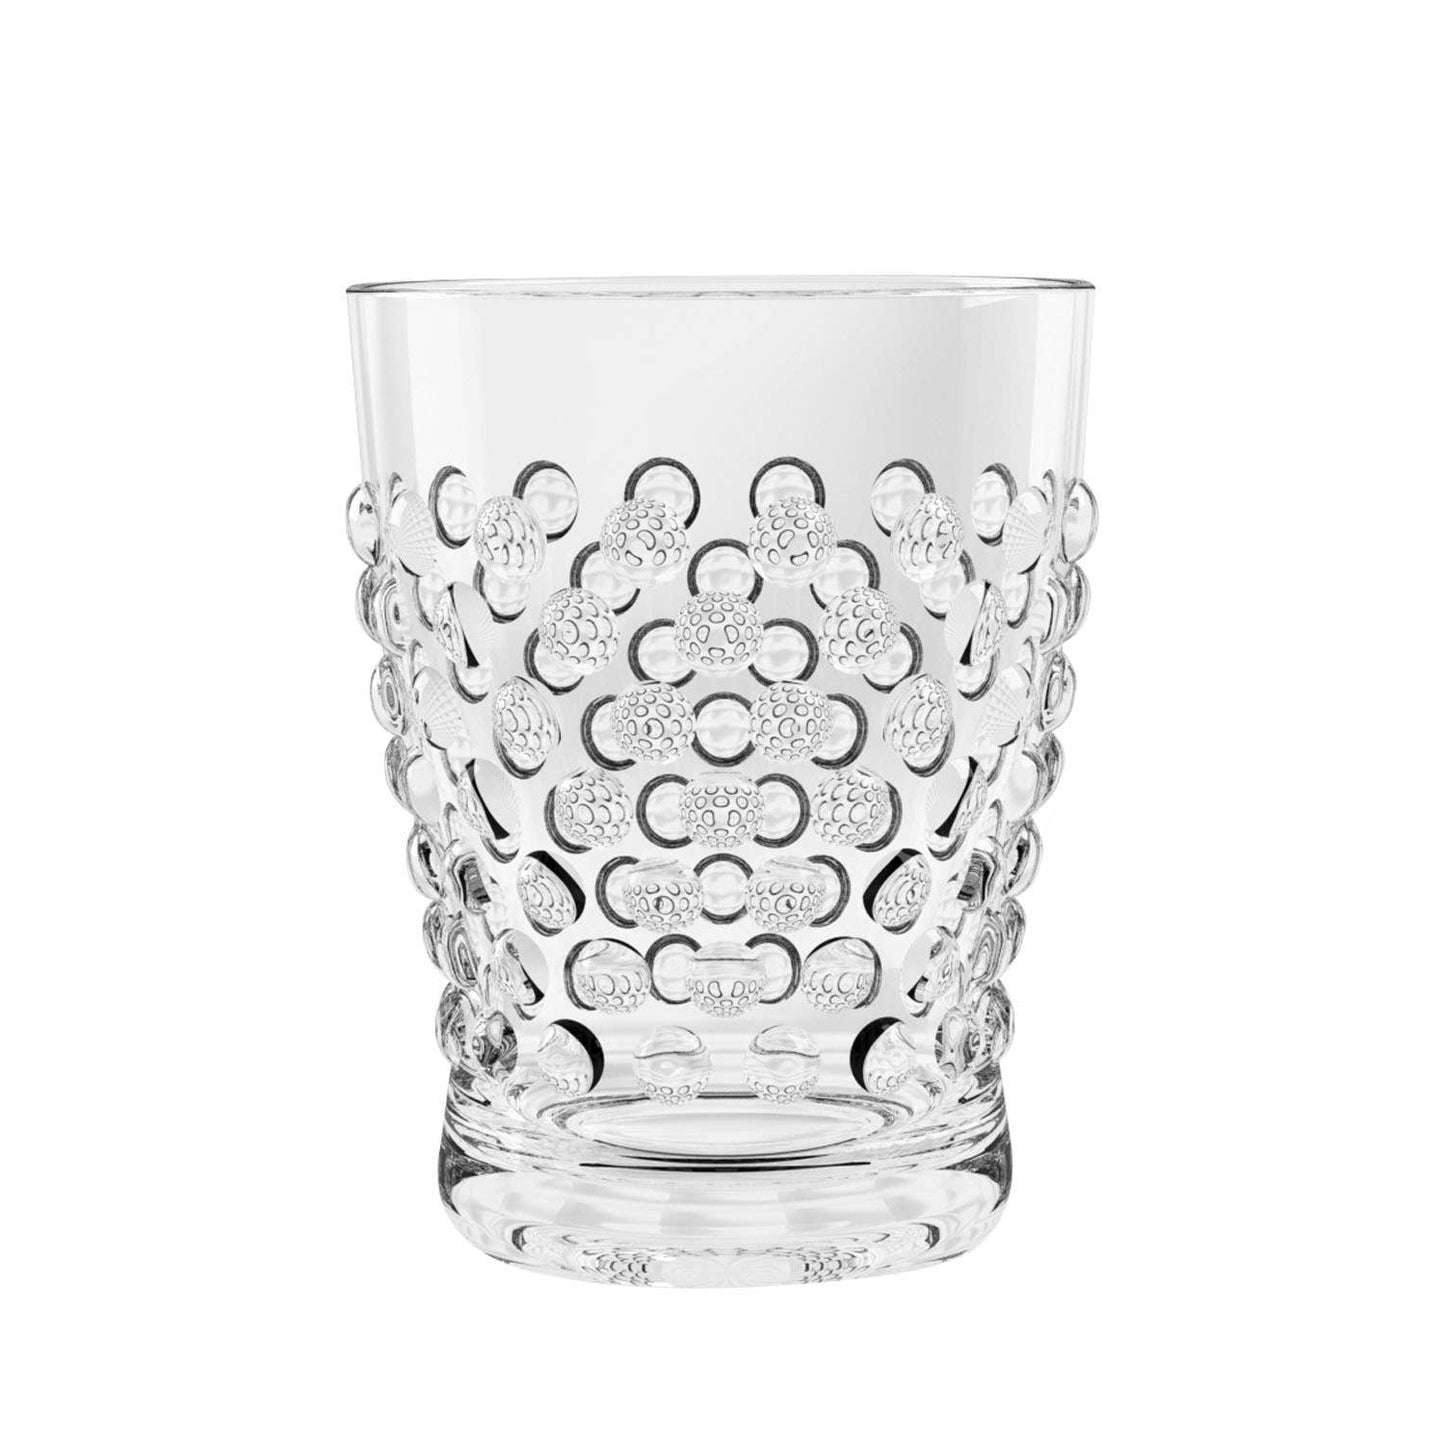 Hobnail Drinkware Collection, Premium Acrylic